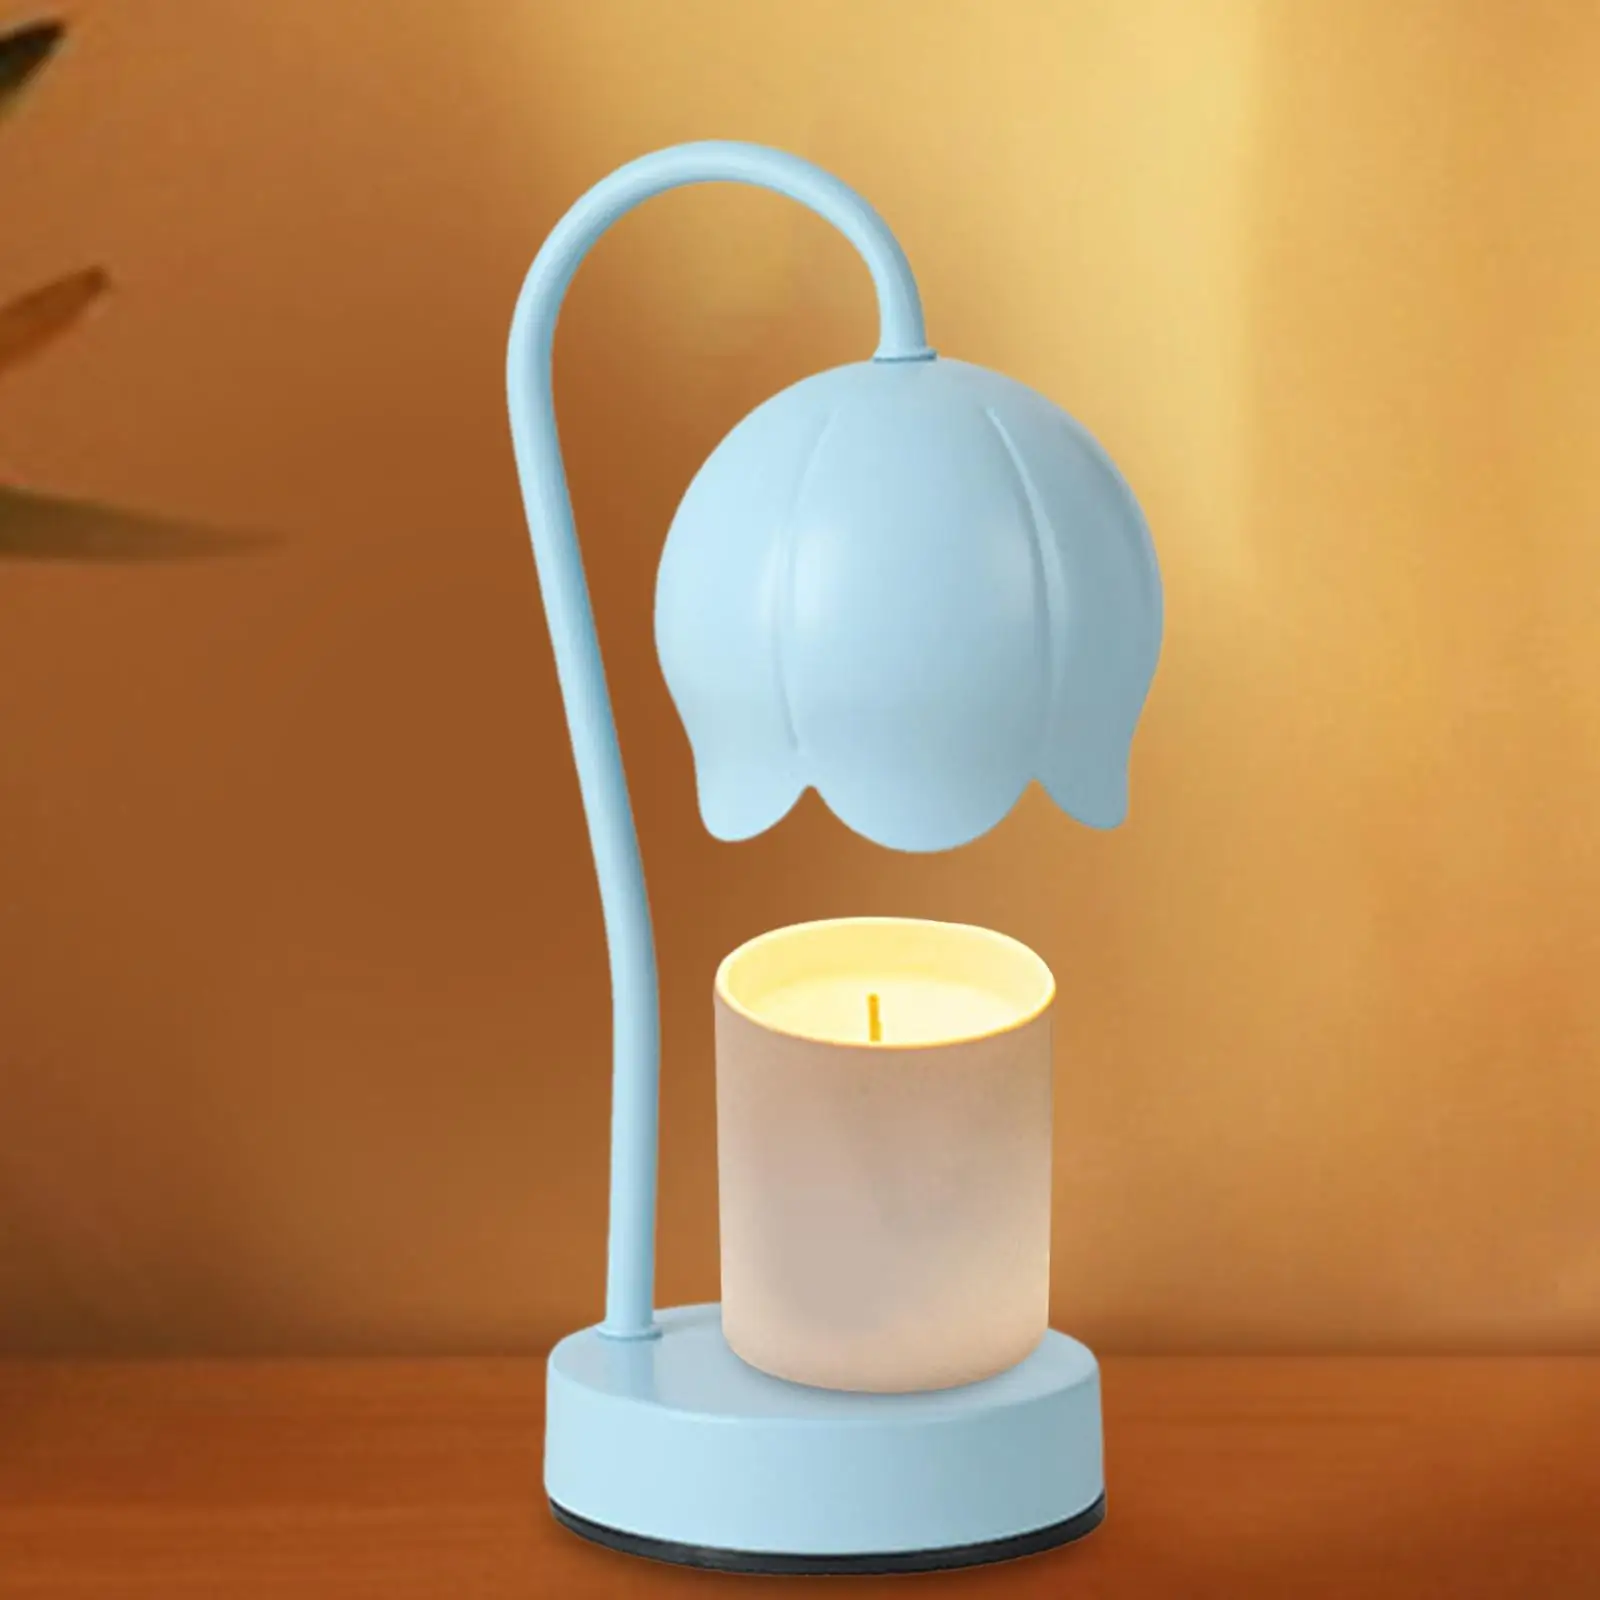 Candle Warmer Lamp Dimmable Light Burner Melter Lamp Desk Table Lamps Metal Vintage Candle Melter for Bedroom Table Centerpiece